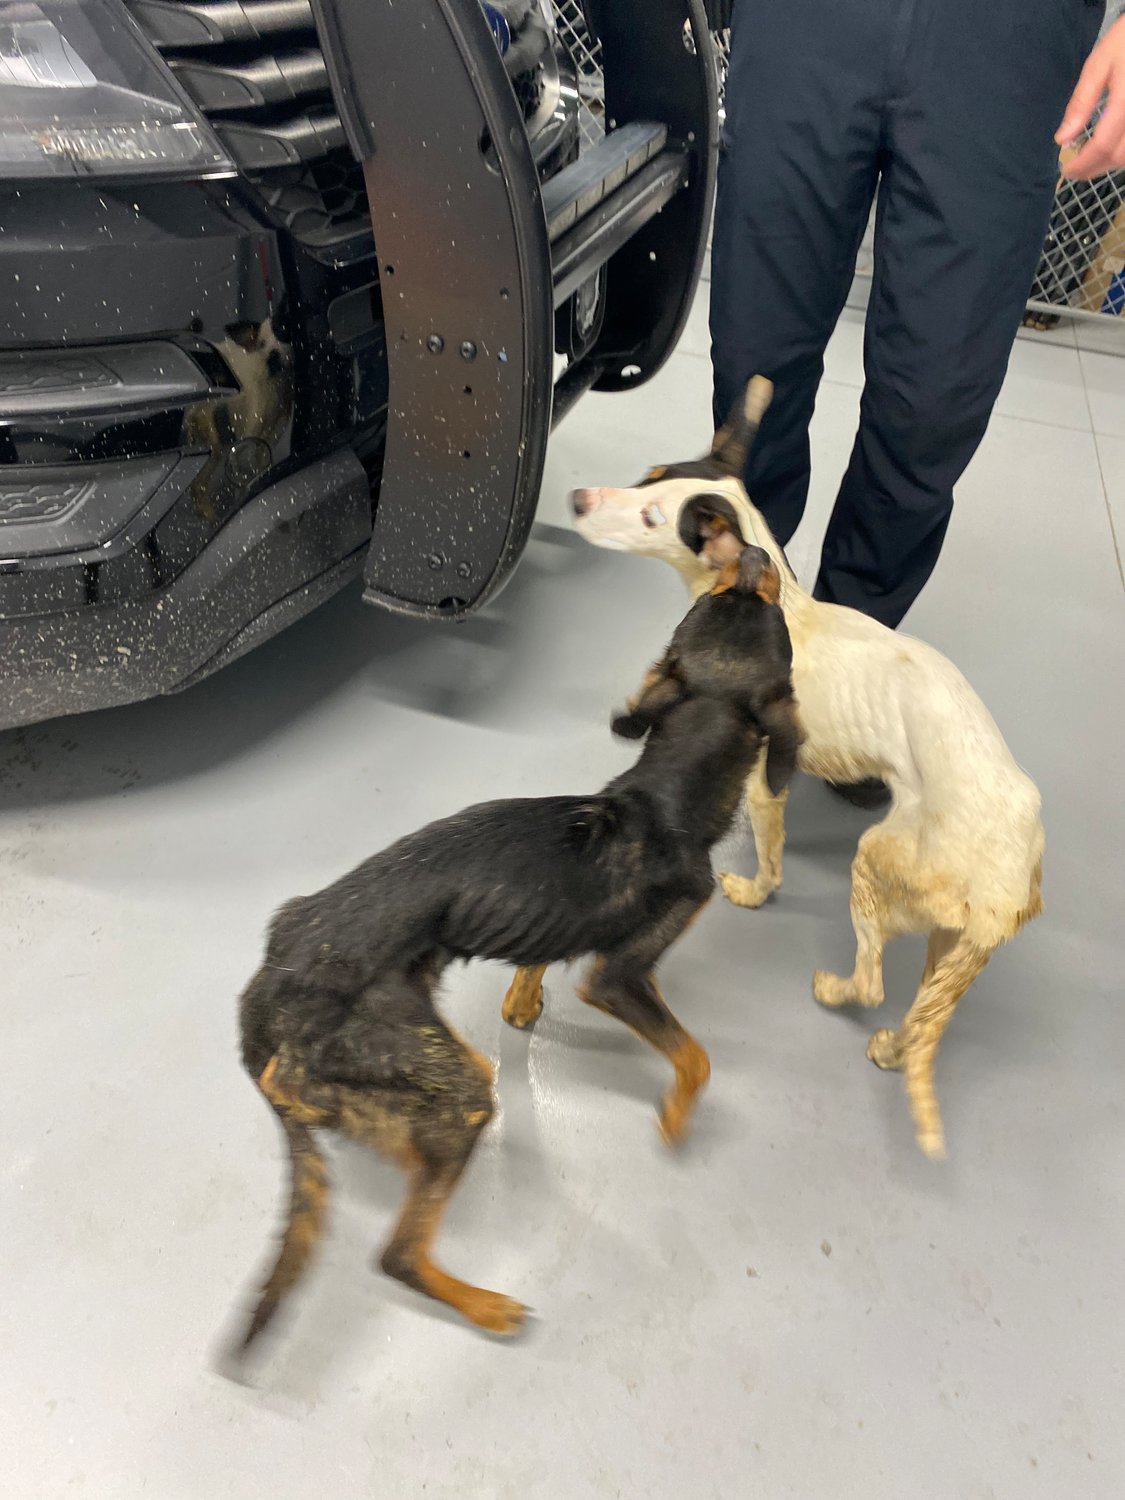 These two undernourished dogs were found abandoned at Glen Farm Thanksgiving morning. The dark-colored one later had to be euthanized due to her poor health, according to police.